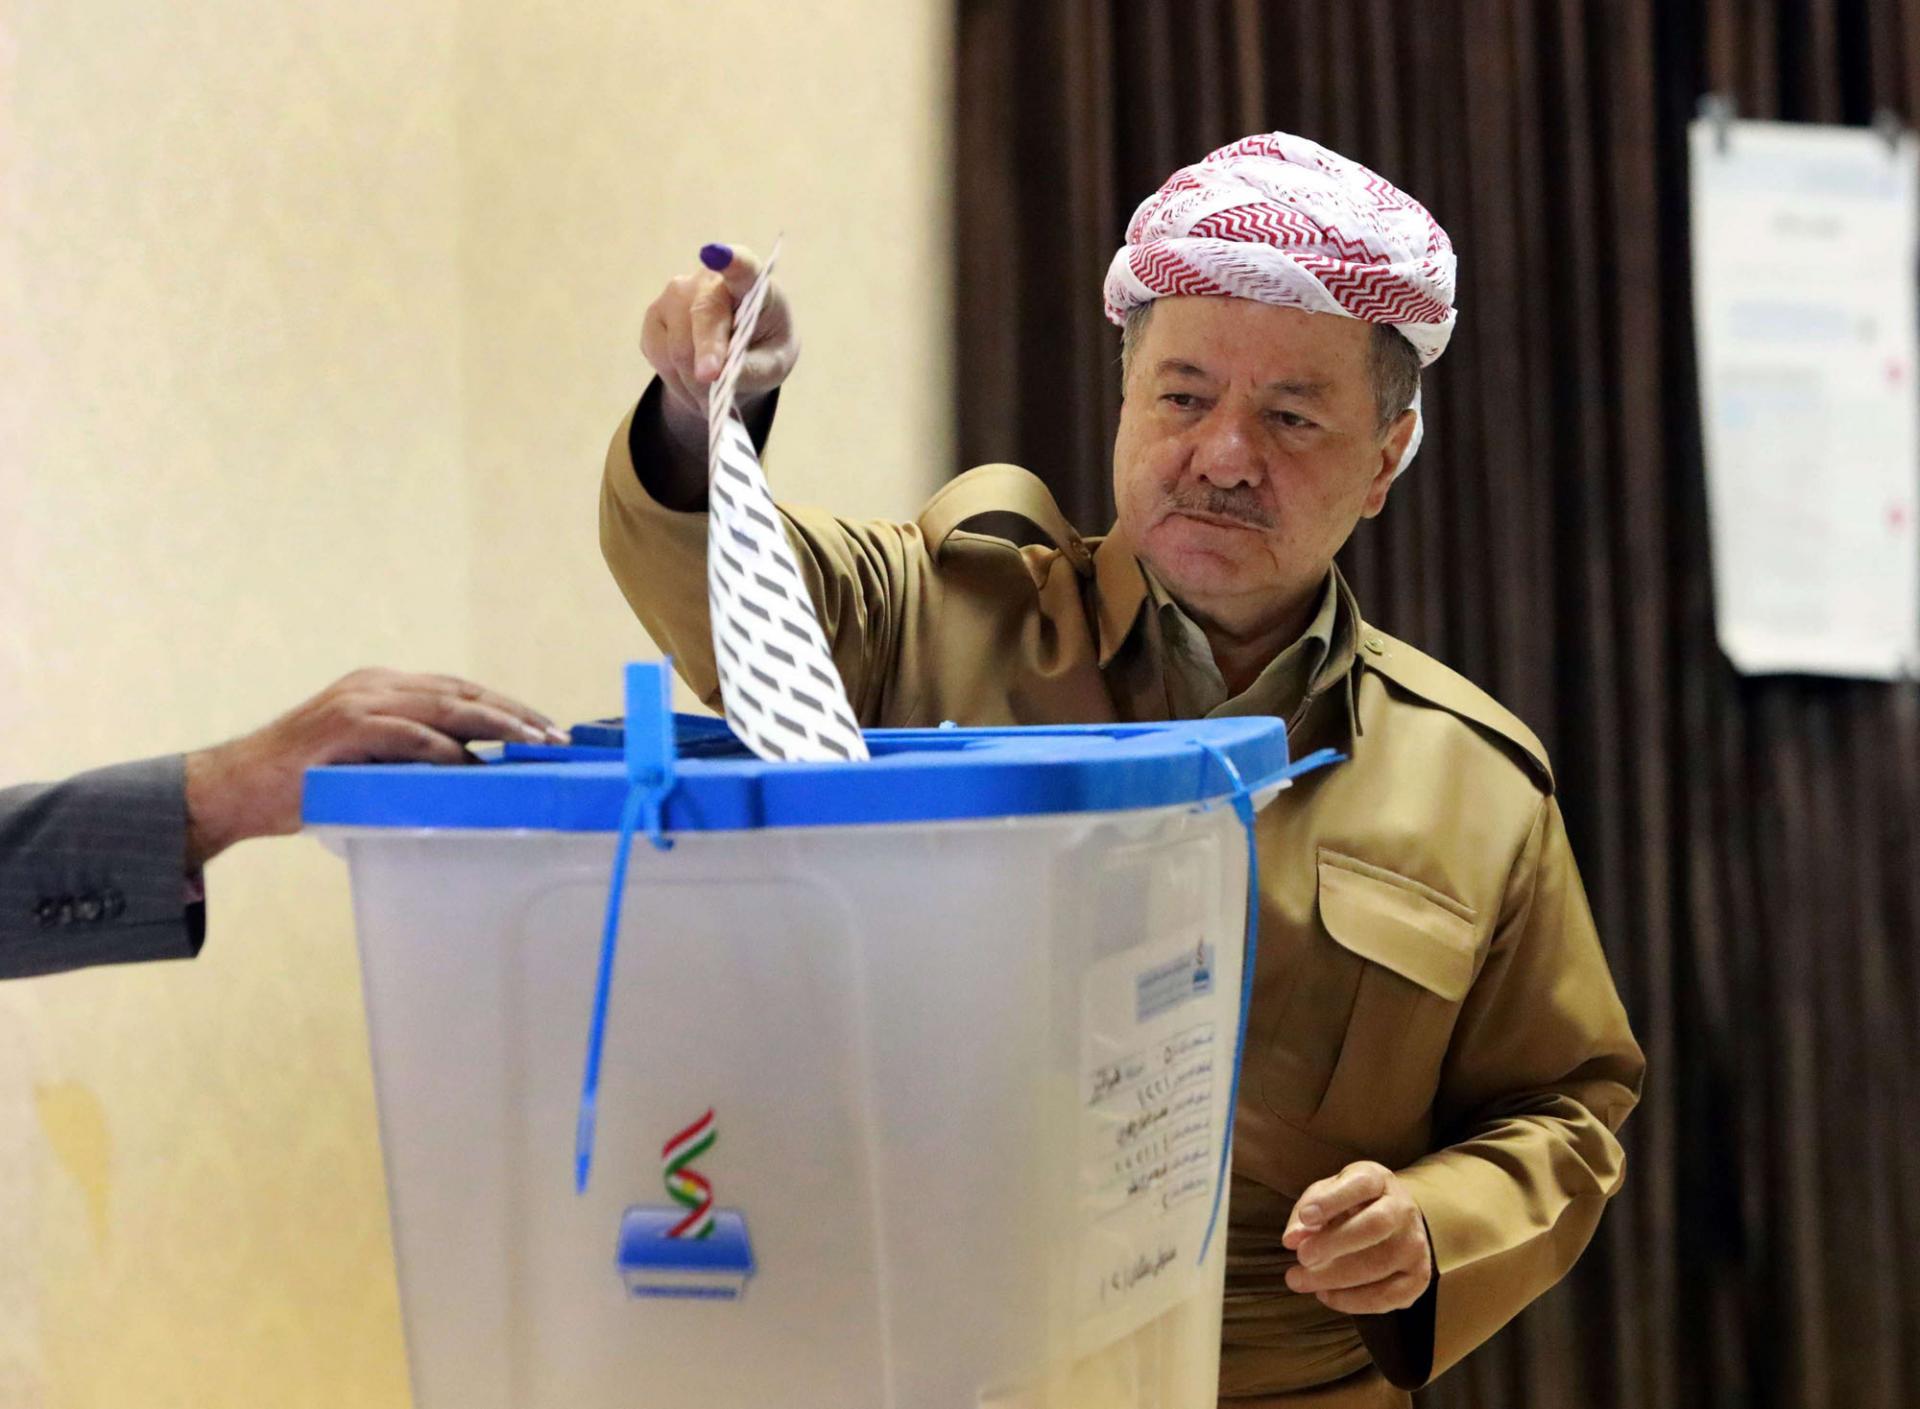  Former leader of the Iraqi Kurdish Regional Government (IKRG) Masoud Barzani gestures after casting his ballot for the parliamentary election at a polling station in Arbil, the capital of the Kurdish autonomous region in northern Iraq